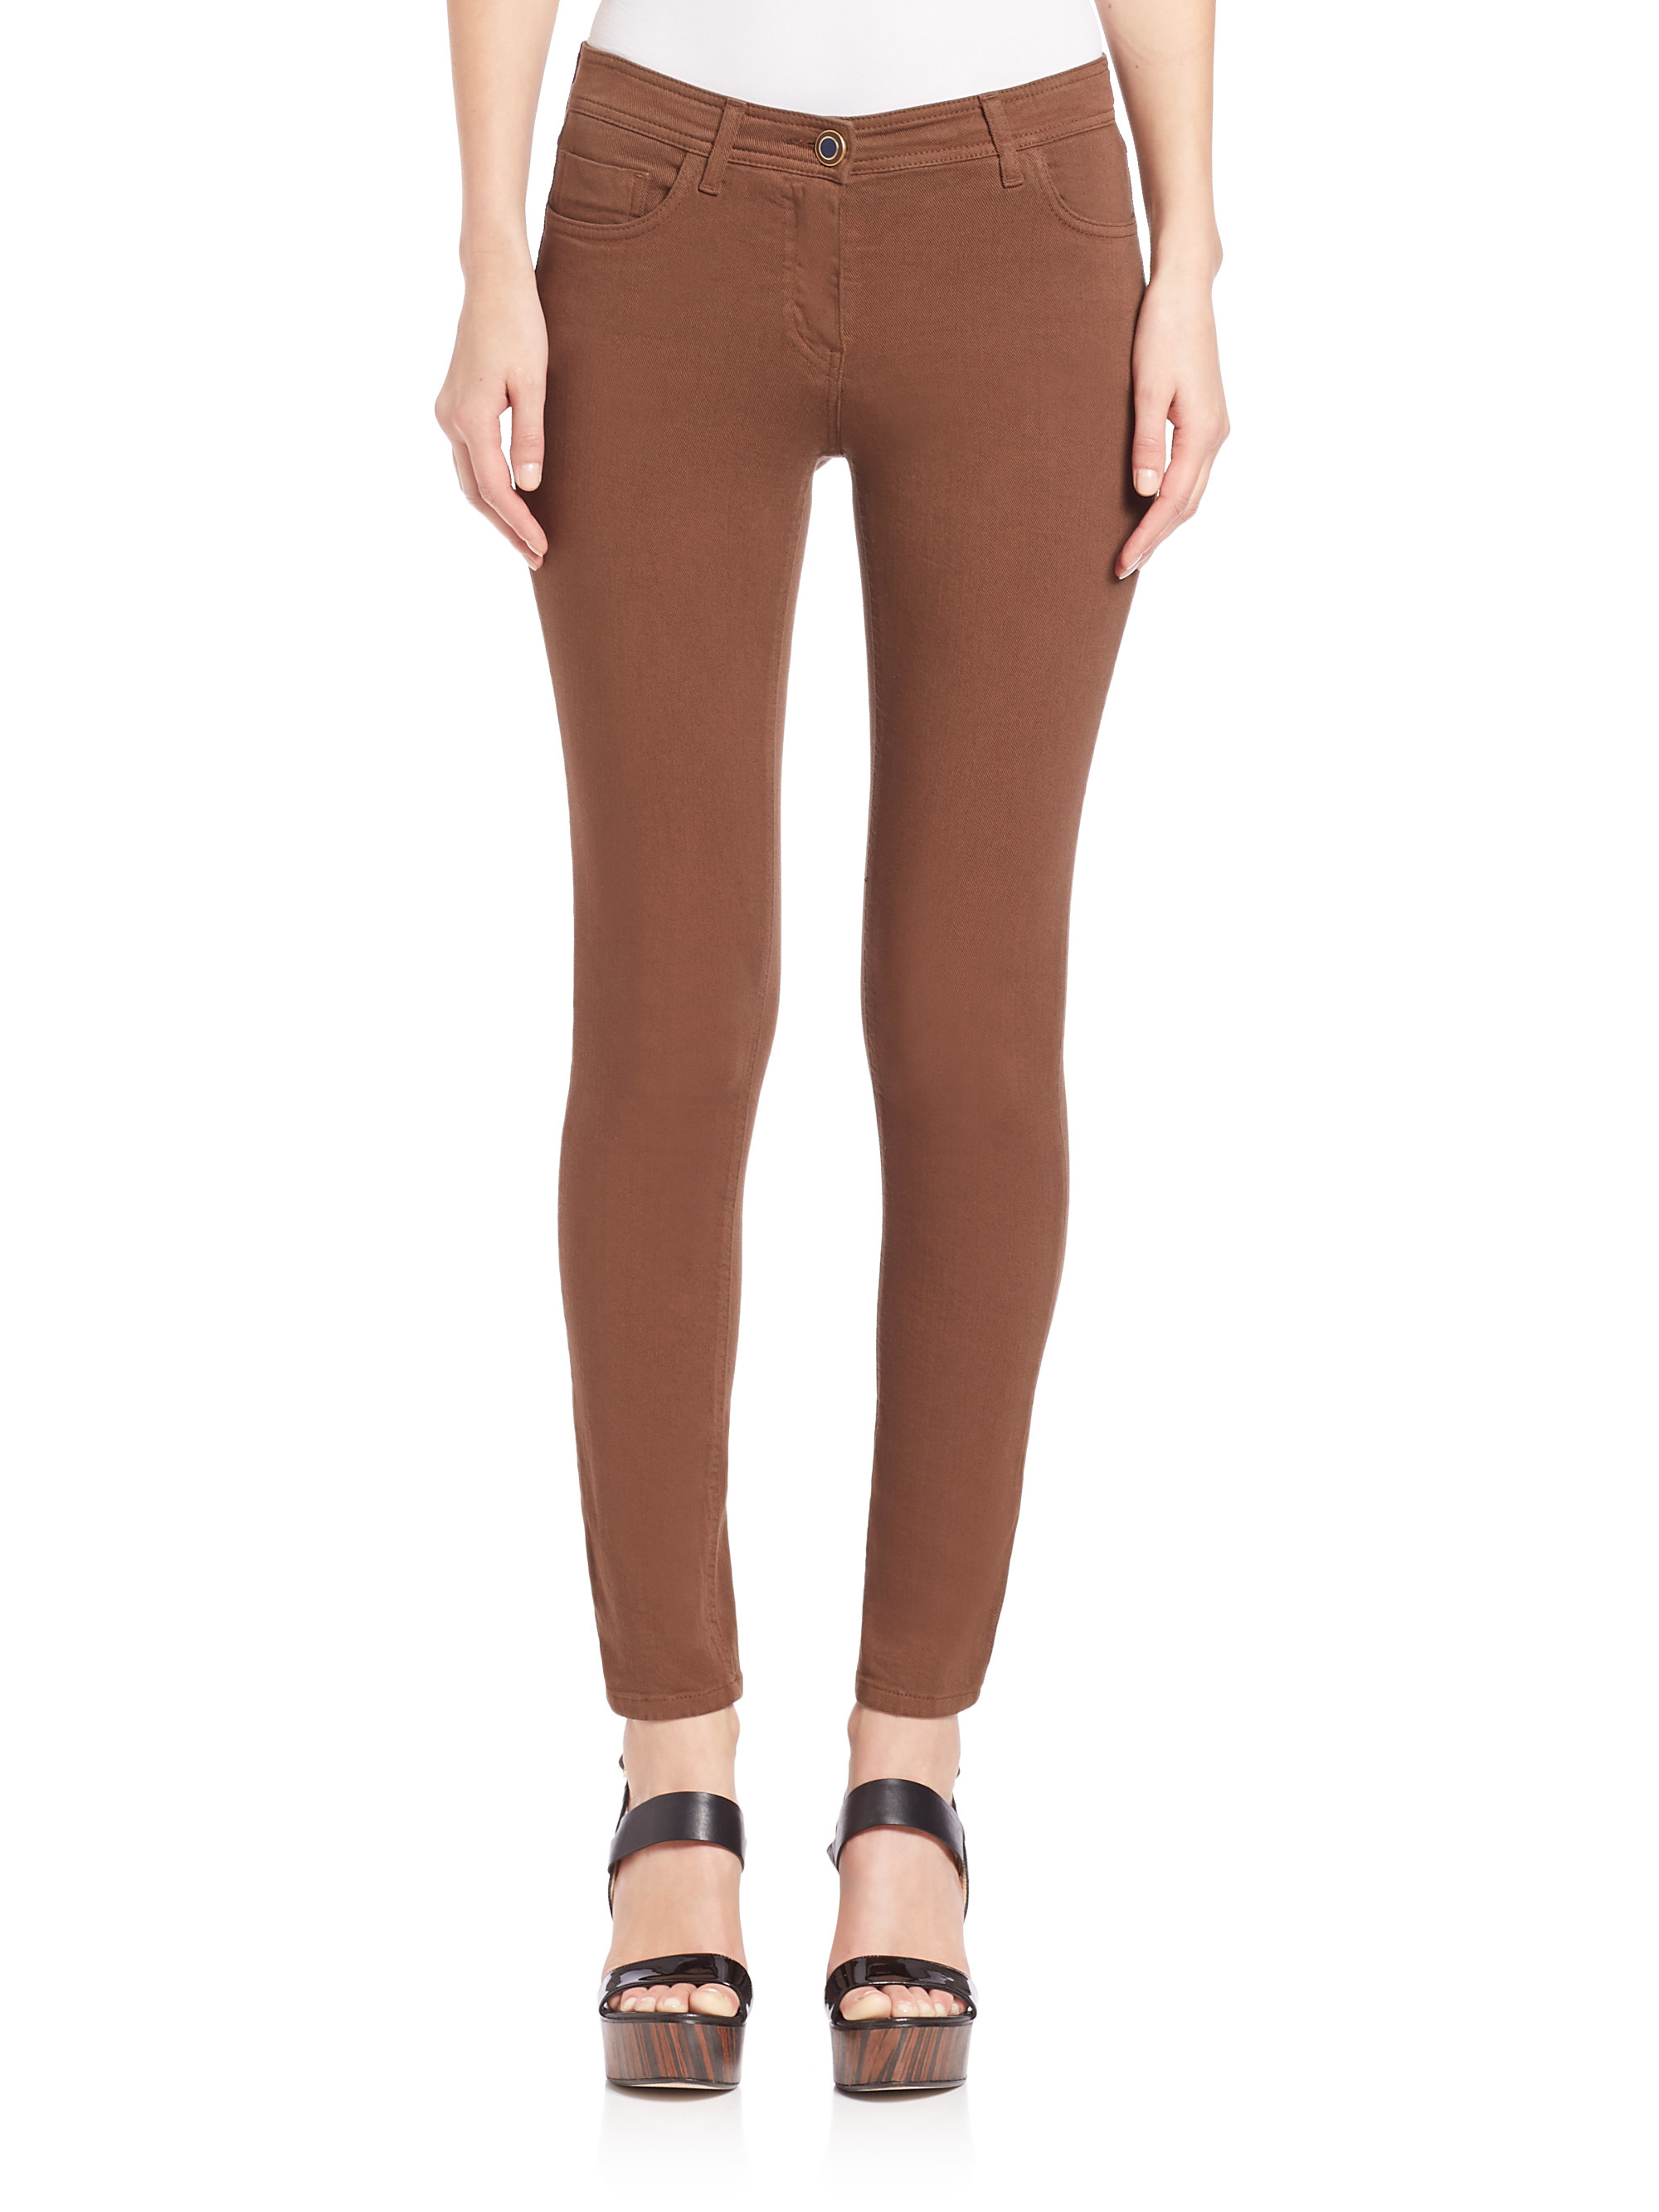 Lyst - Etro Cotton Stretch Skinny Jeans in Brown